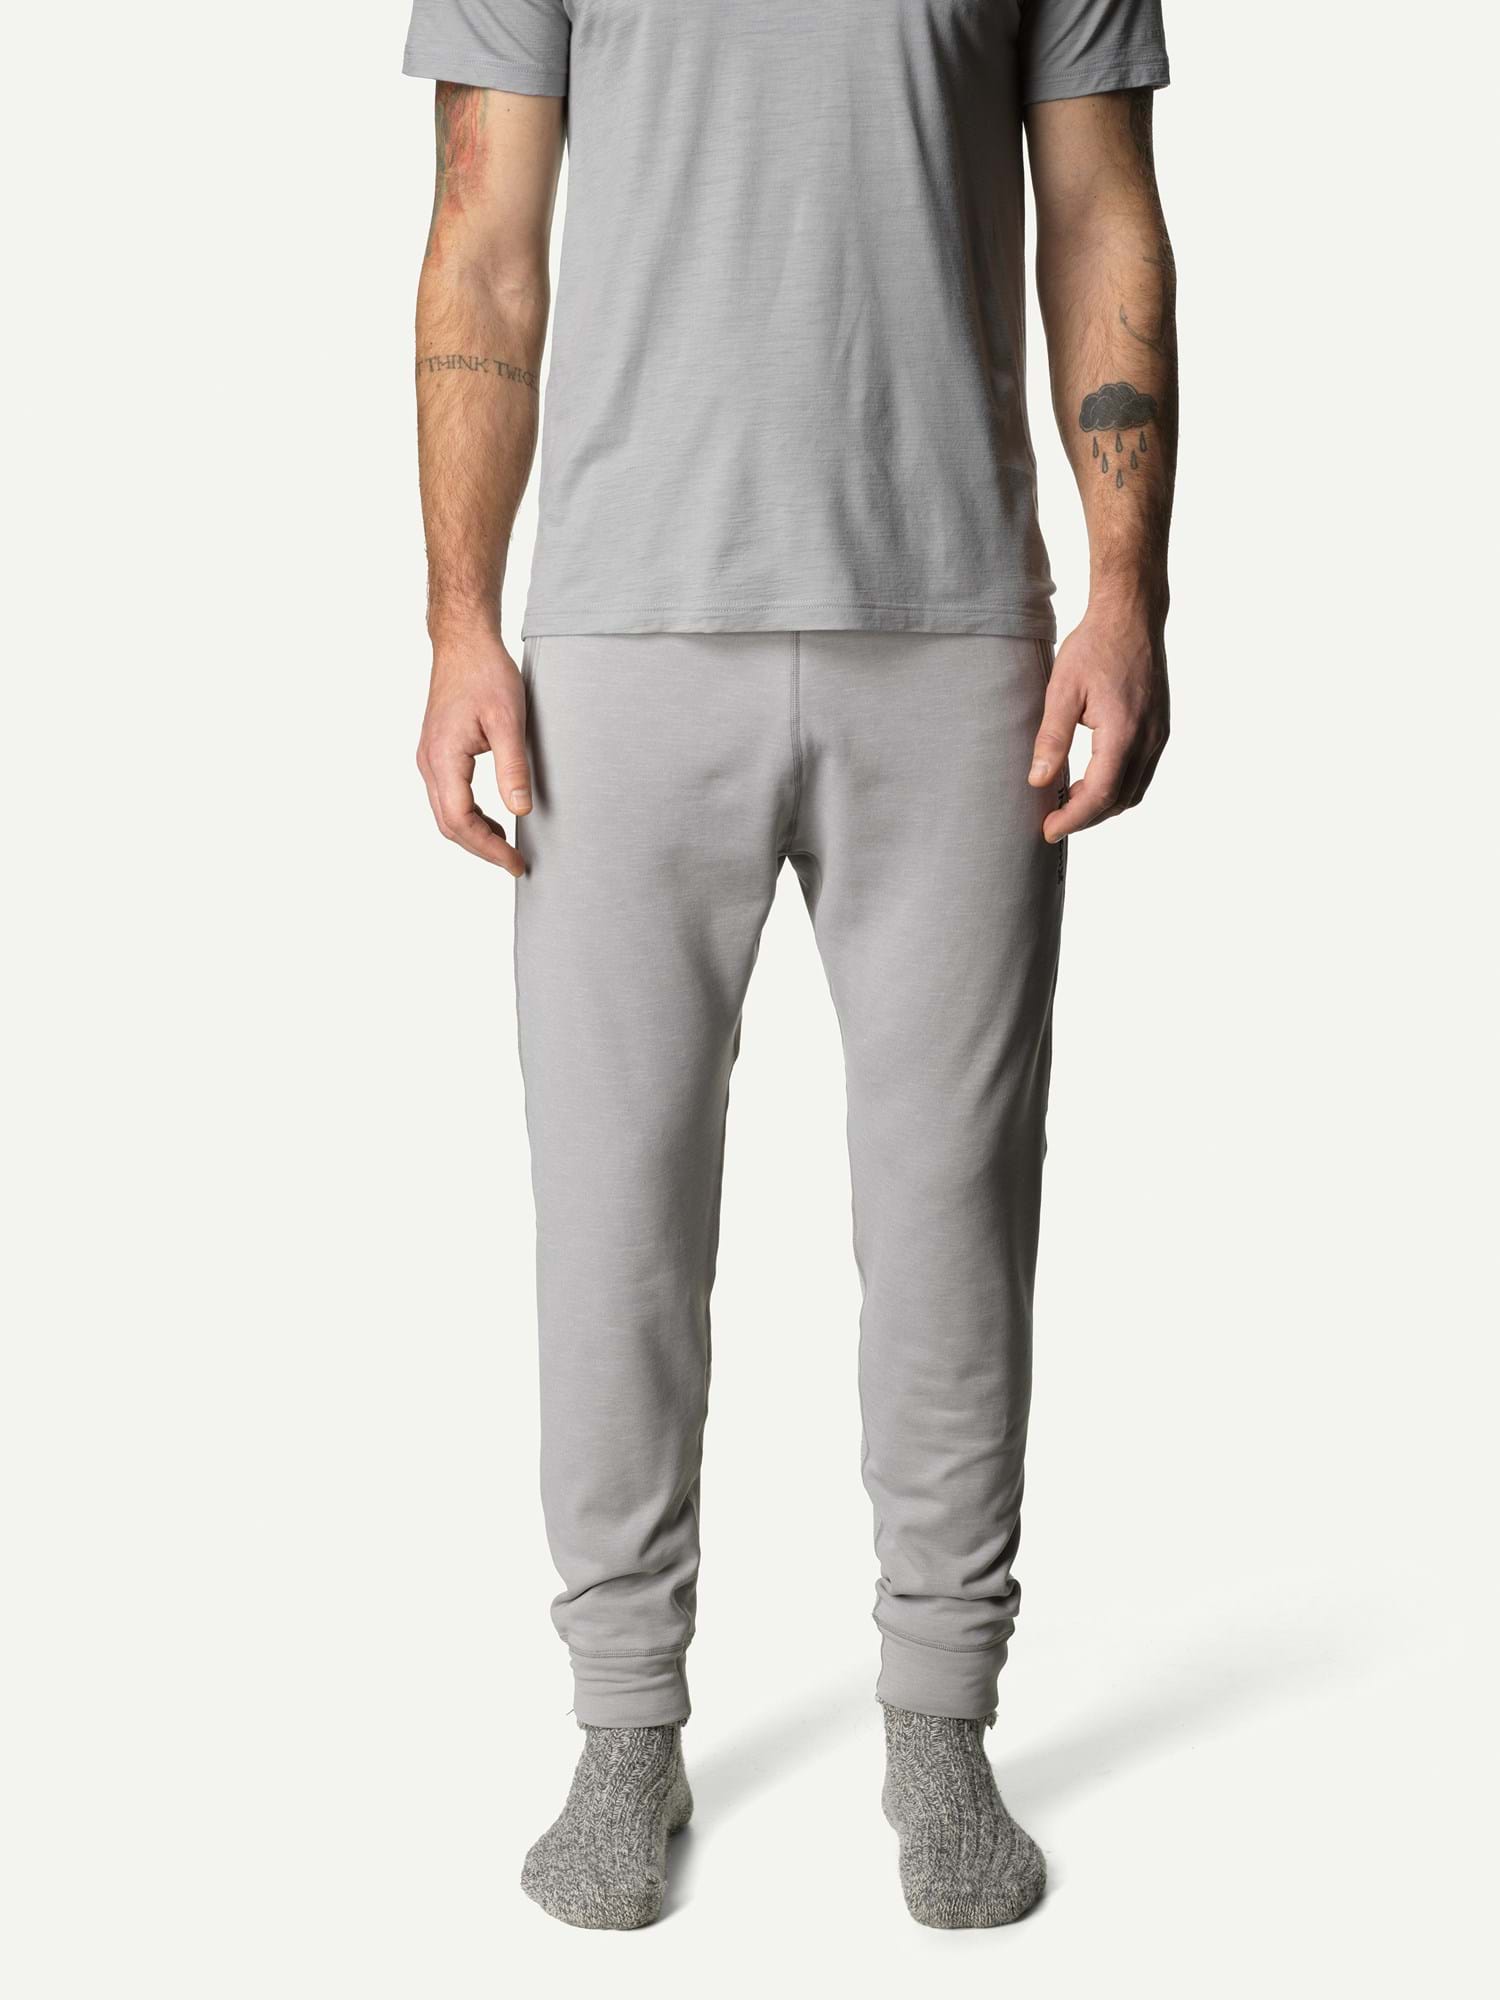 M's Outright Pants | Houdini Sportswear